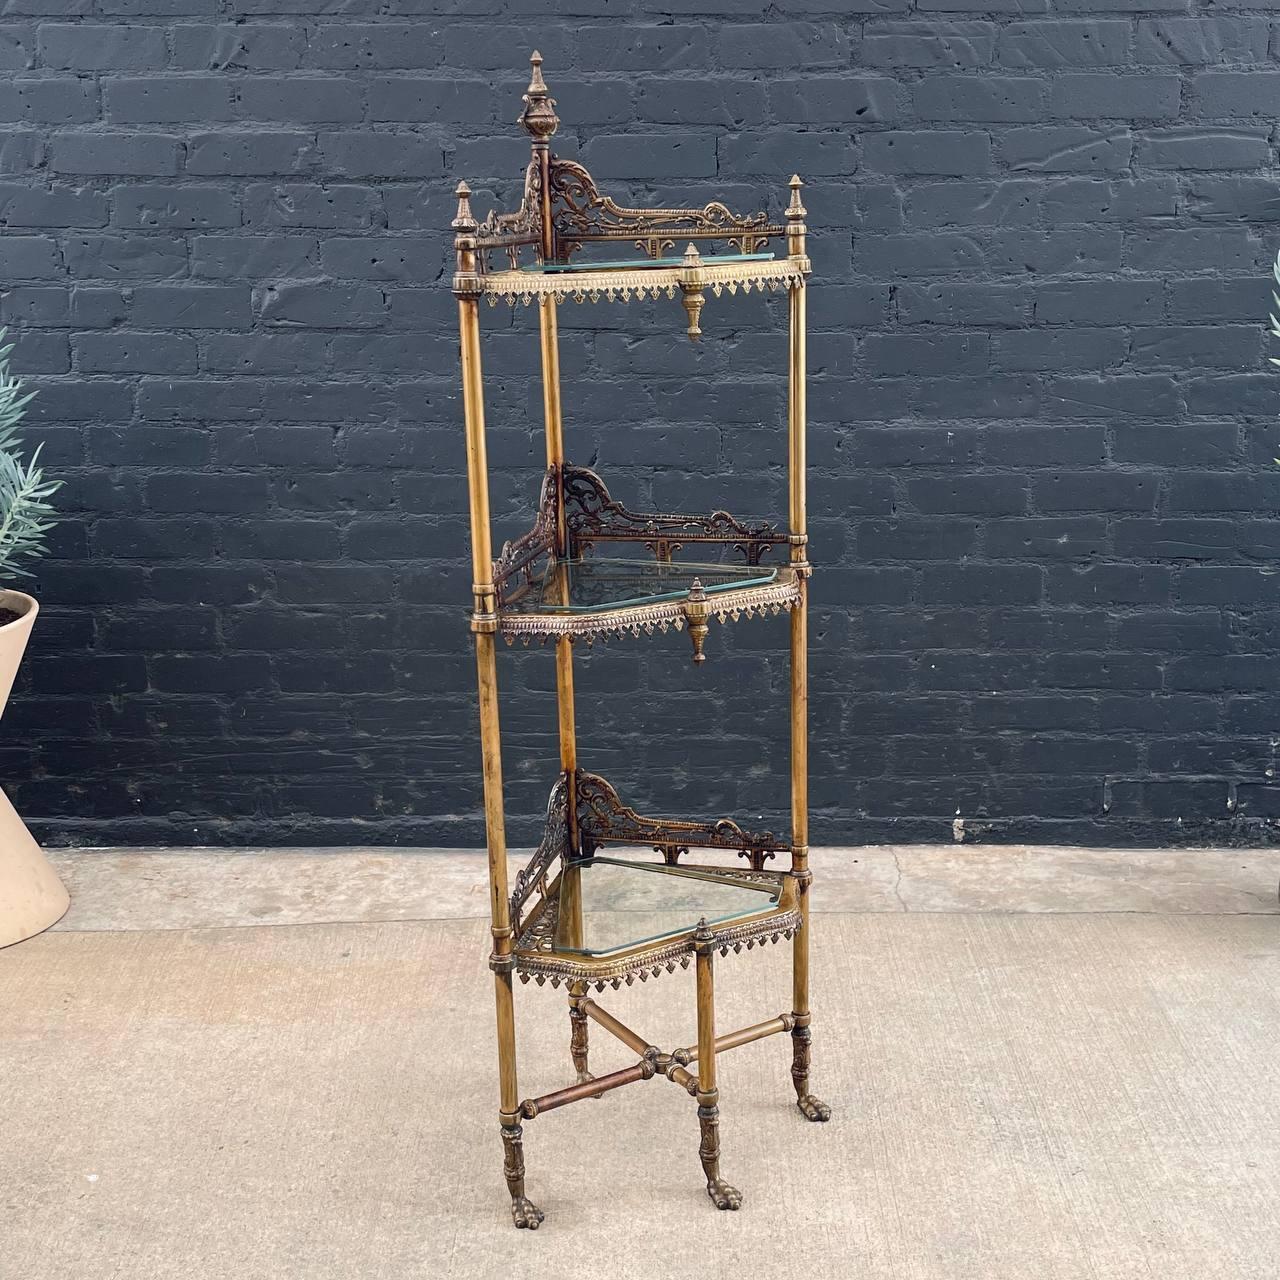 English Victorian Tier Brass & Glass Etagere Corner Shelf

Country: American
Materials: Brass, Glass
Style: Antique
Year: 1940’s

$2,895

Dimensions:
65.25”H x 23”W x 17”D